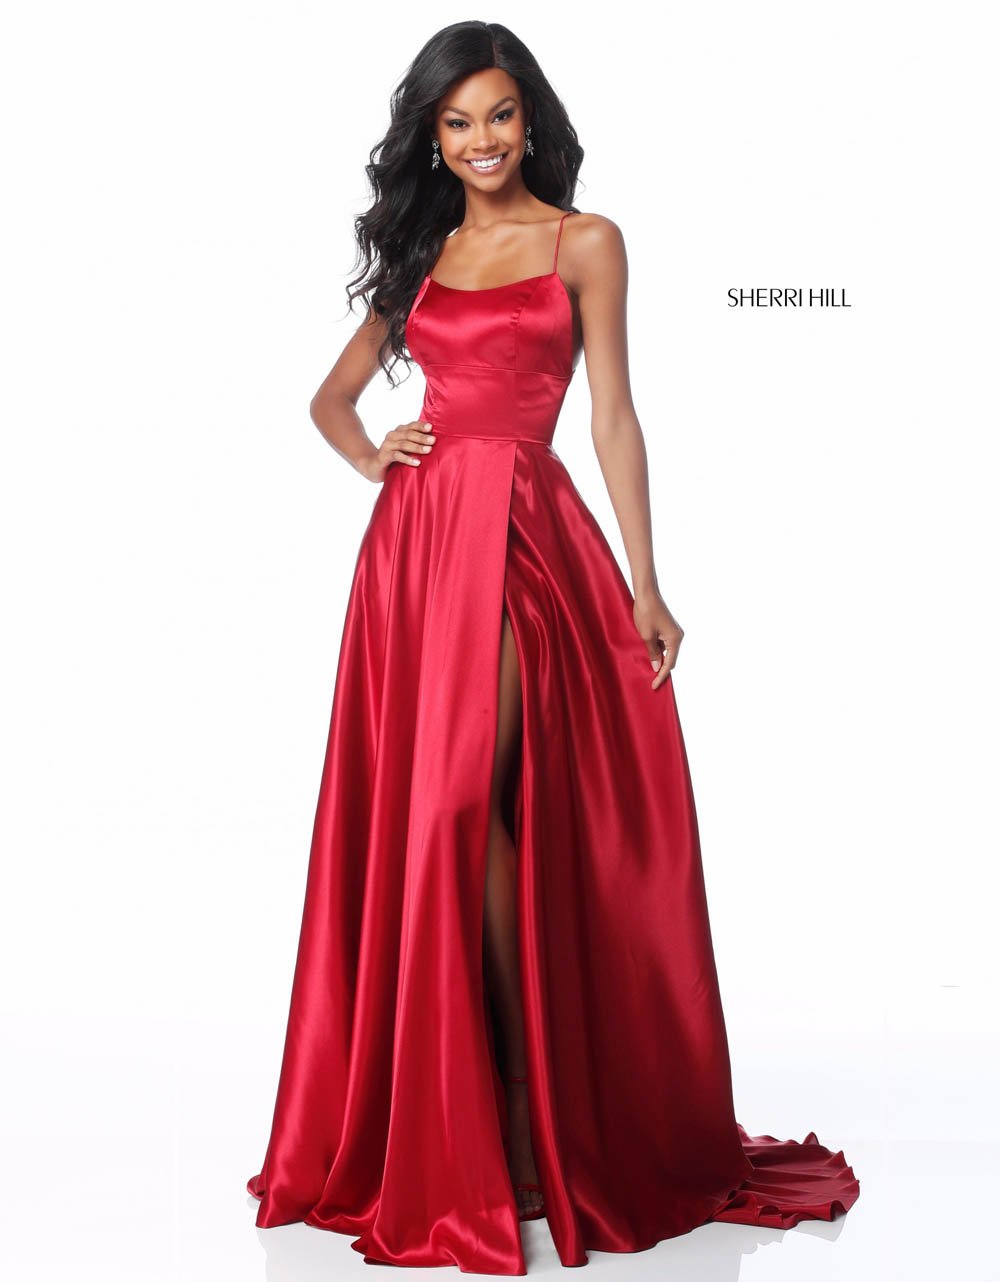 Red Off Shoulder Mermaid Red Satin Bridesmaid Dresses With Ruffles And  Backless Design Floor Length Satin Wedding Party Dress In Plus Size From  Misshowdress, $71.36 | DHgate.Com